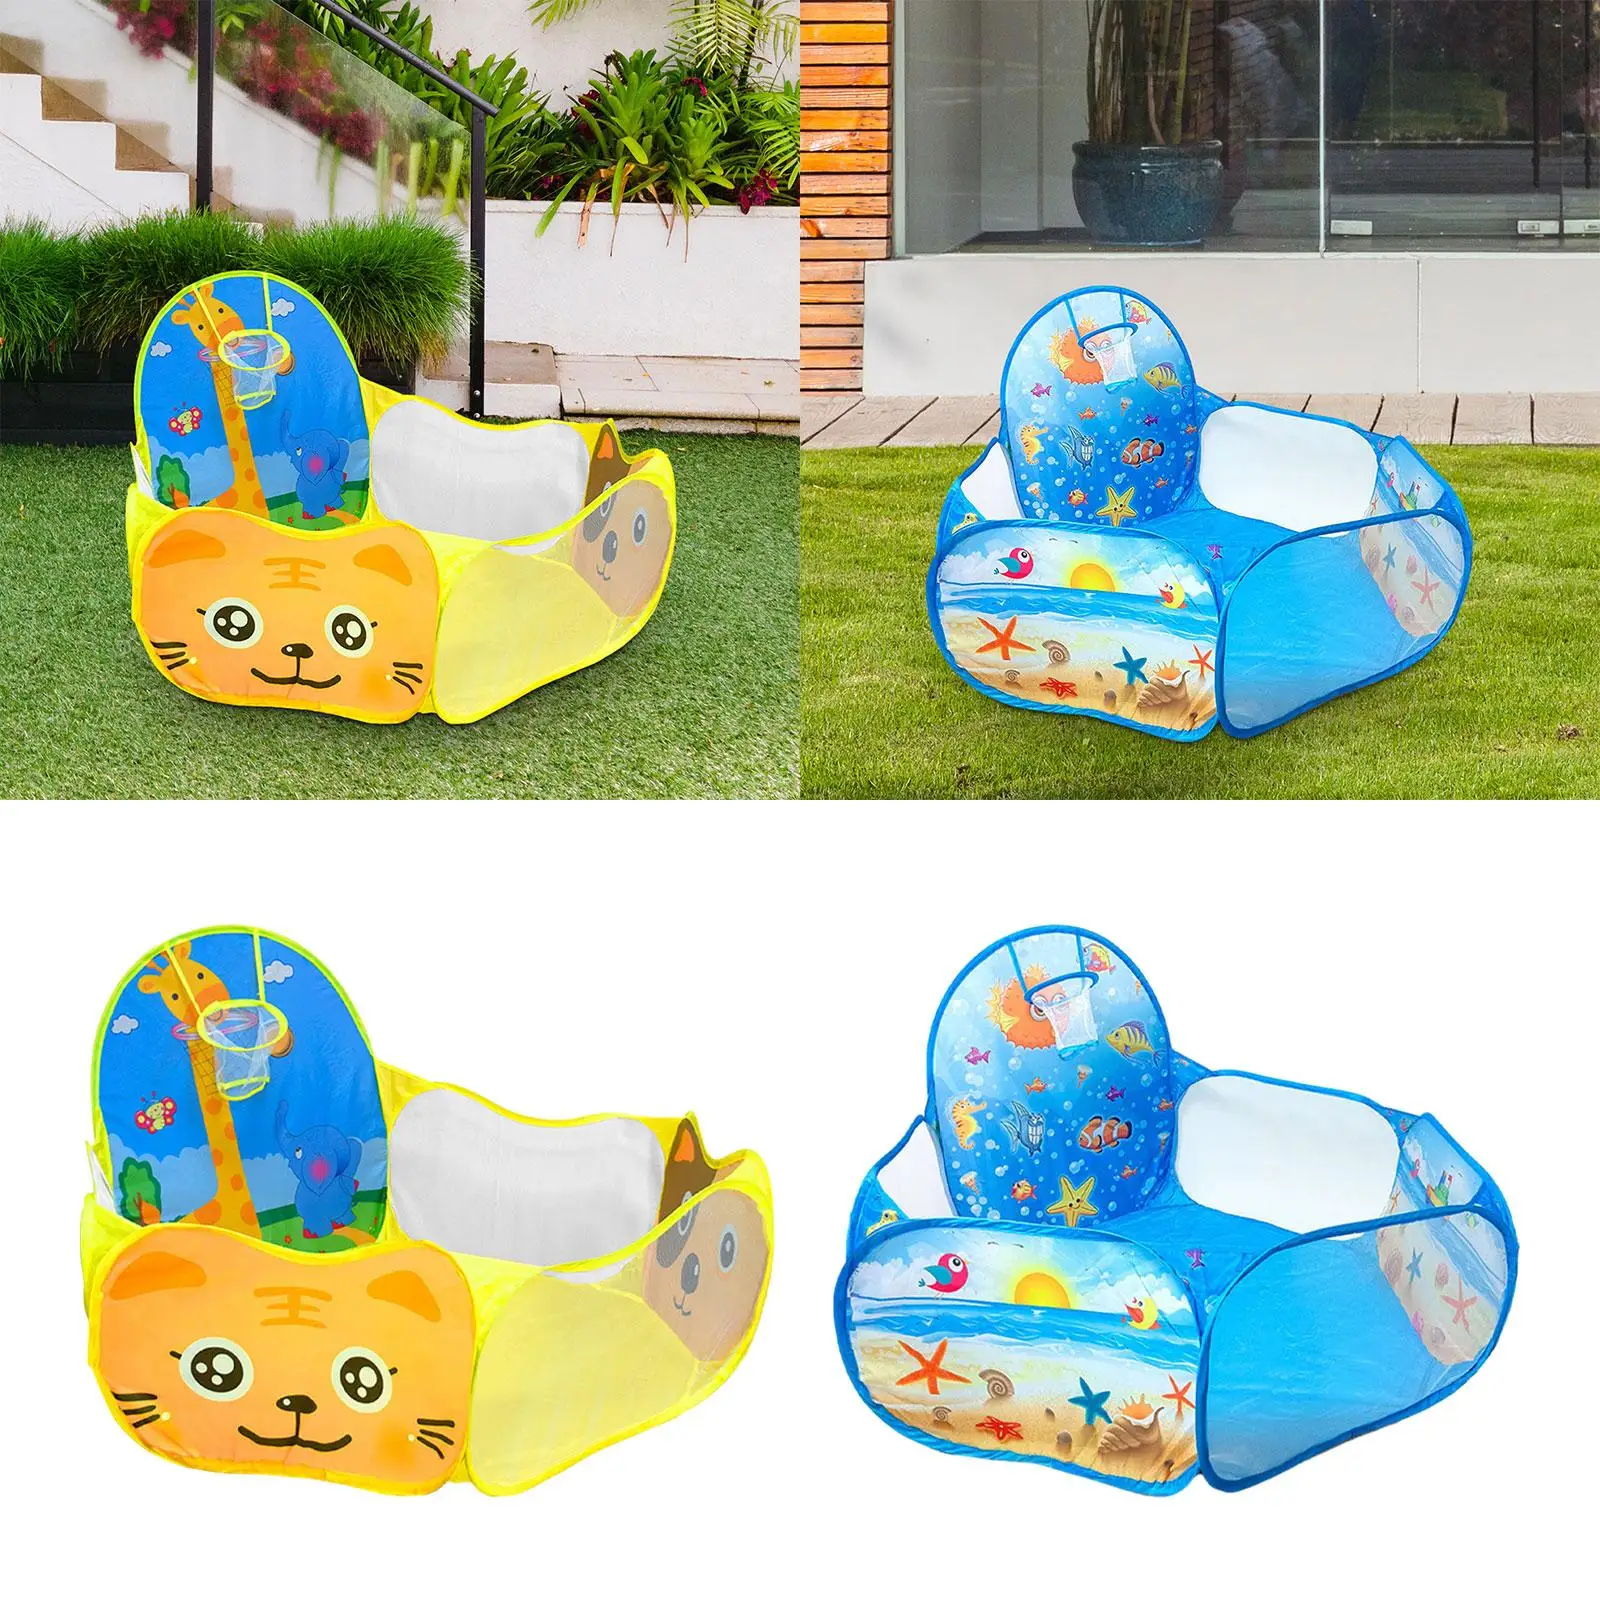 Kids Play Tent Portable Balls Not Included Playpen Ball Pool Foldable Tent for Children Kids Boys Girls Outdoor Indoor Play